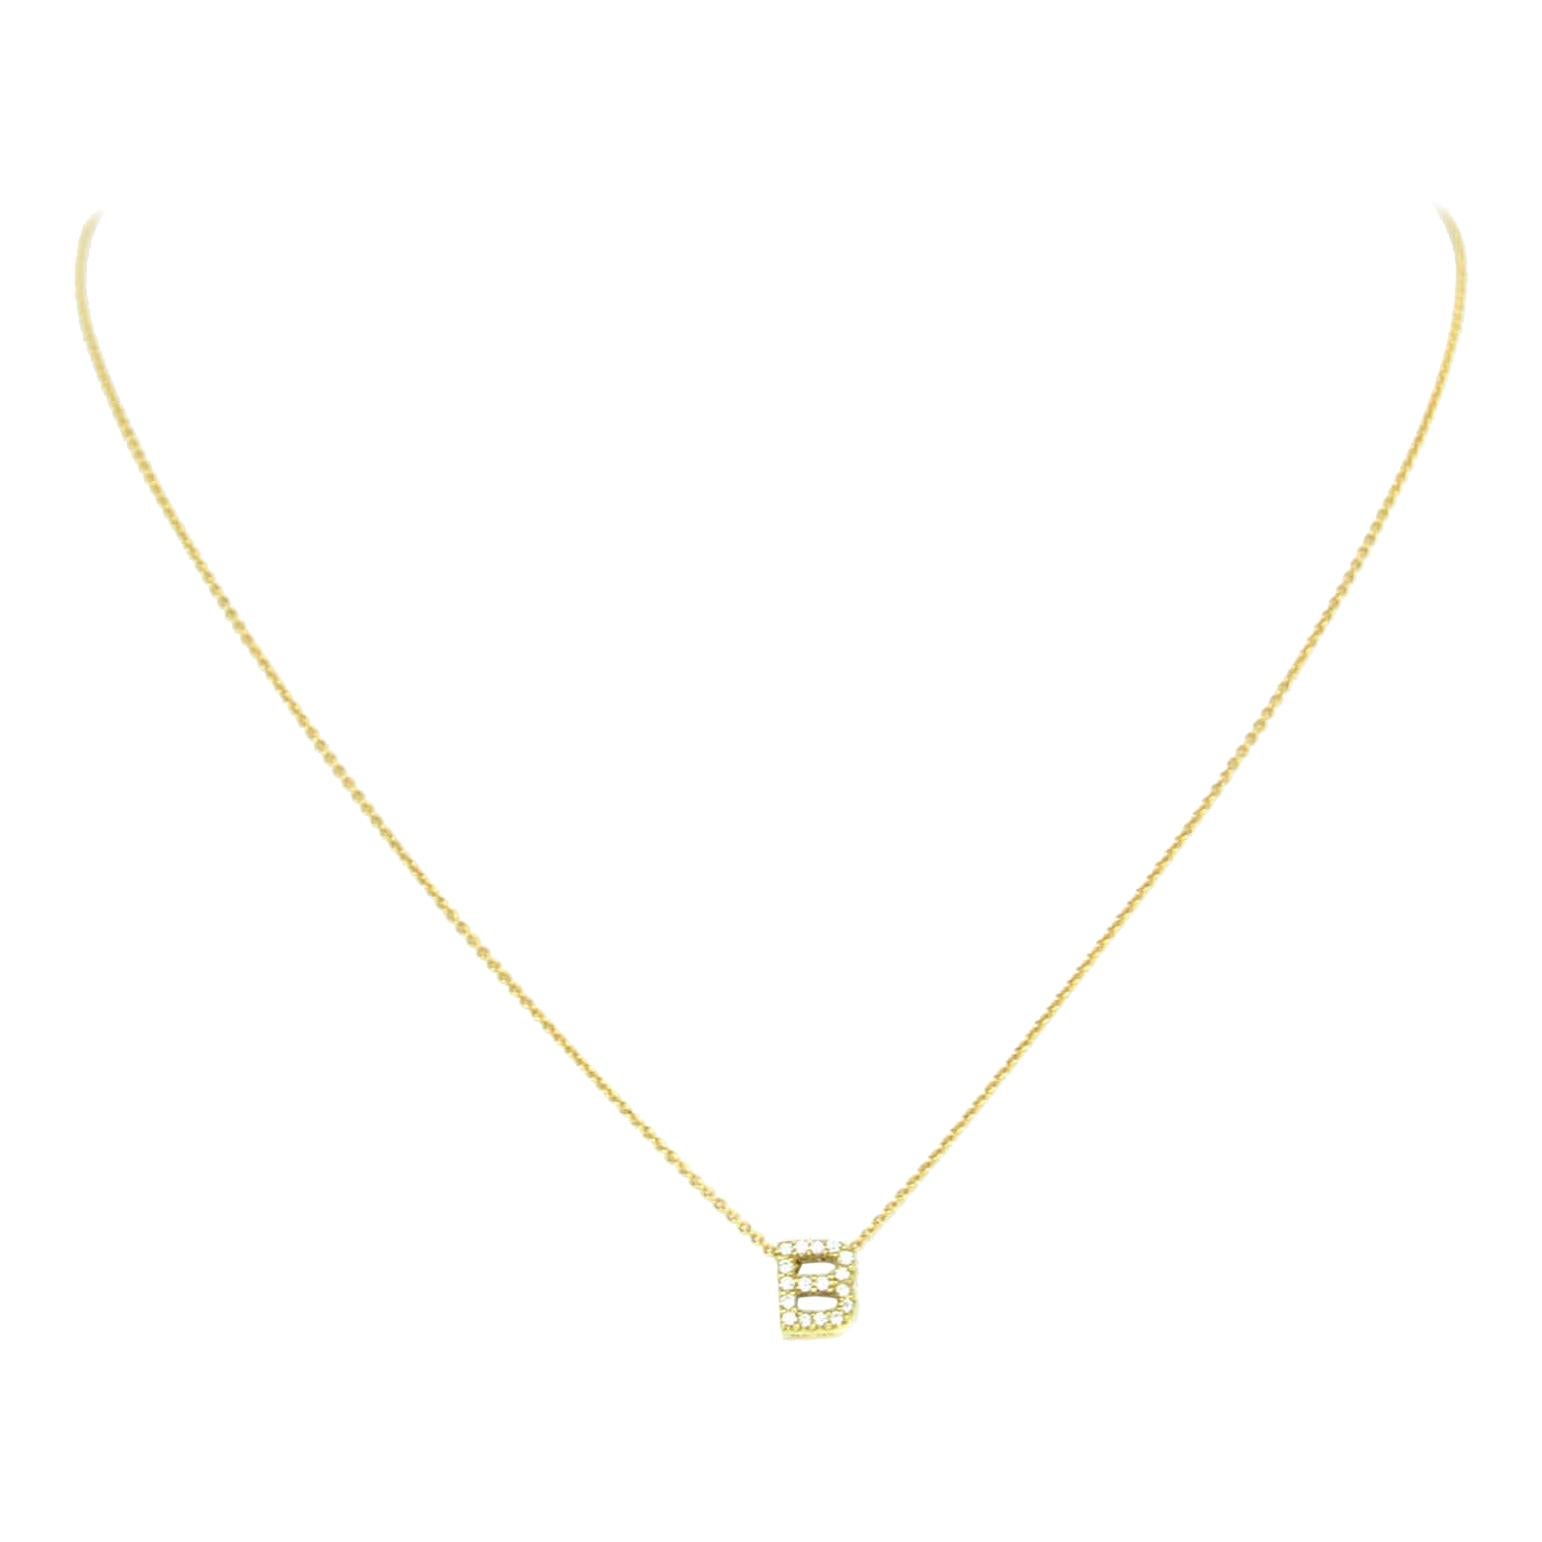 Roberto Coin 18k Gold/Diamond Tiny Treasures Initial Thoughts "B" Necklace